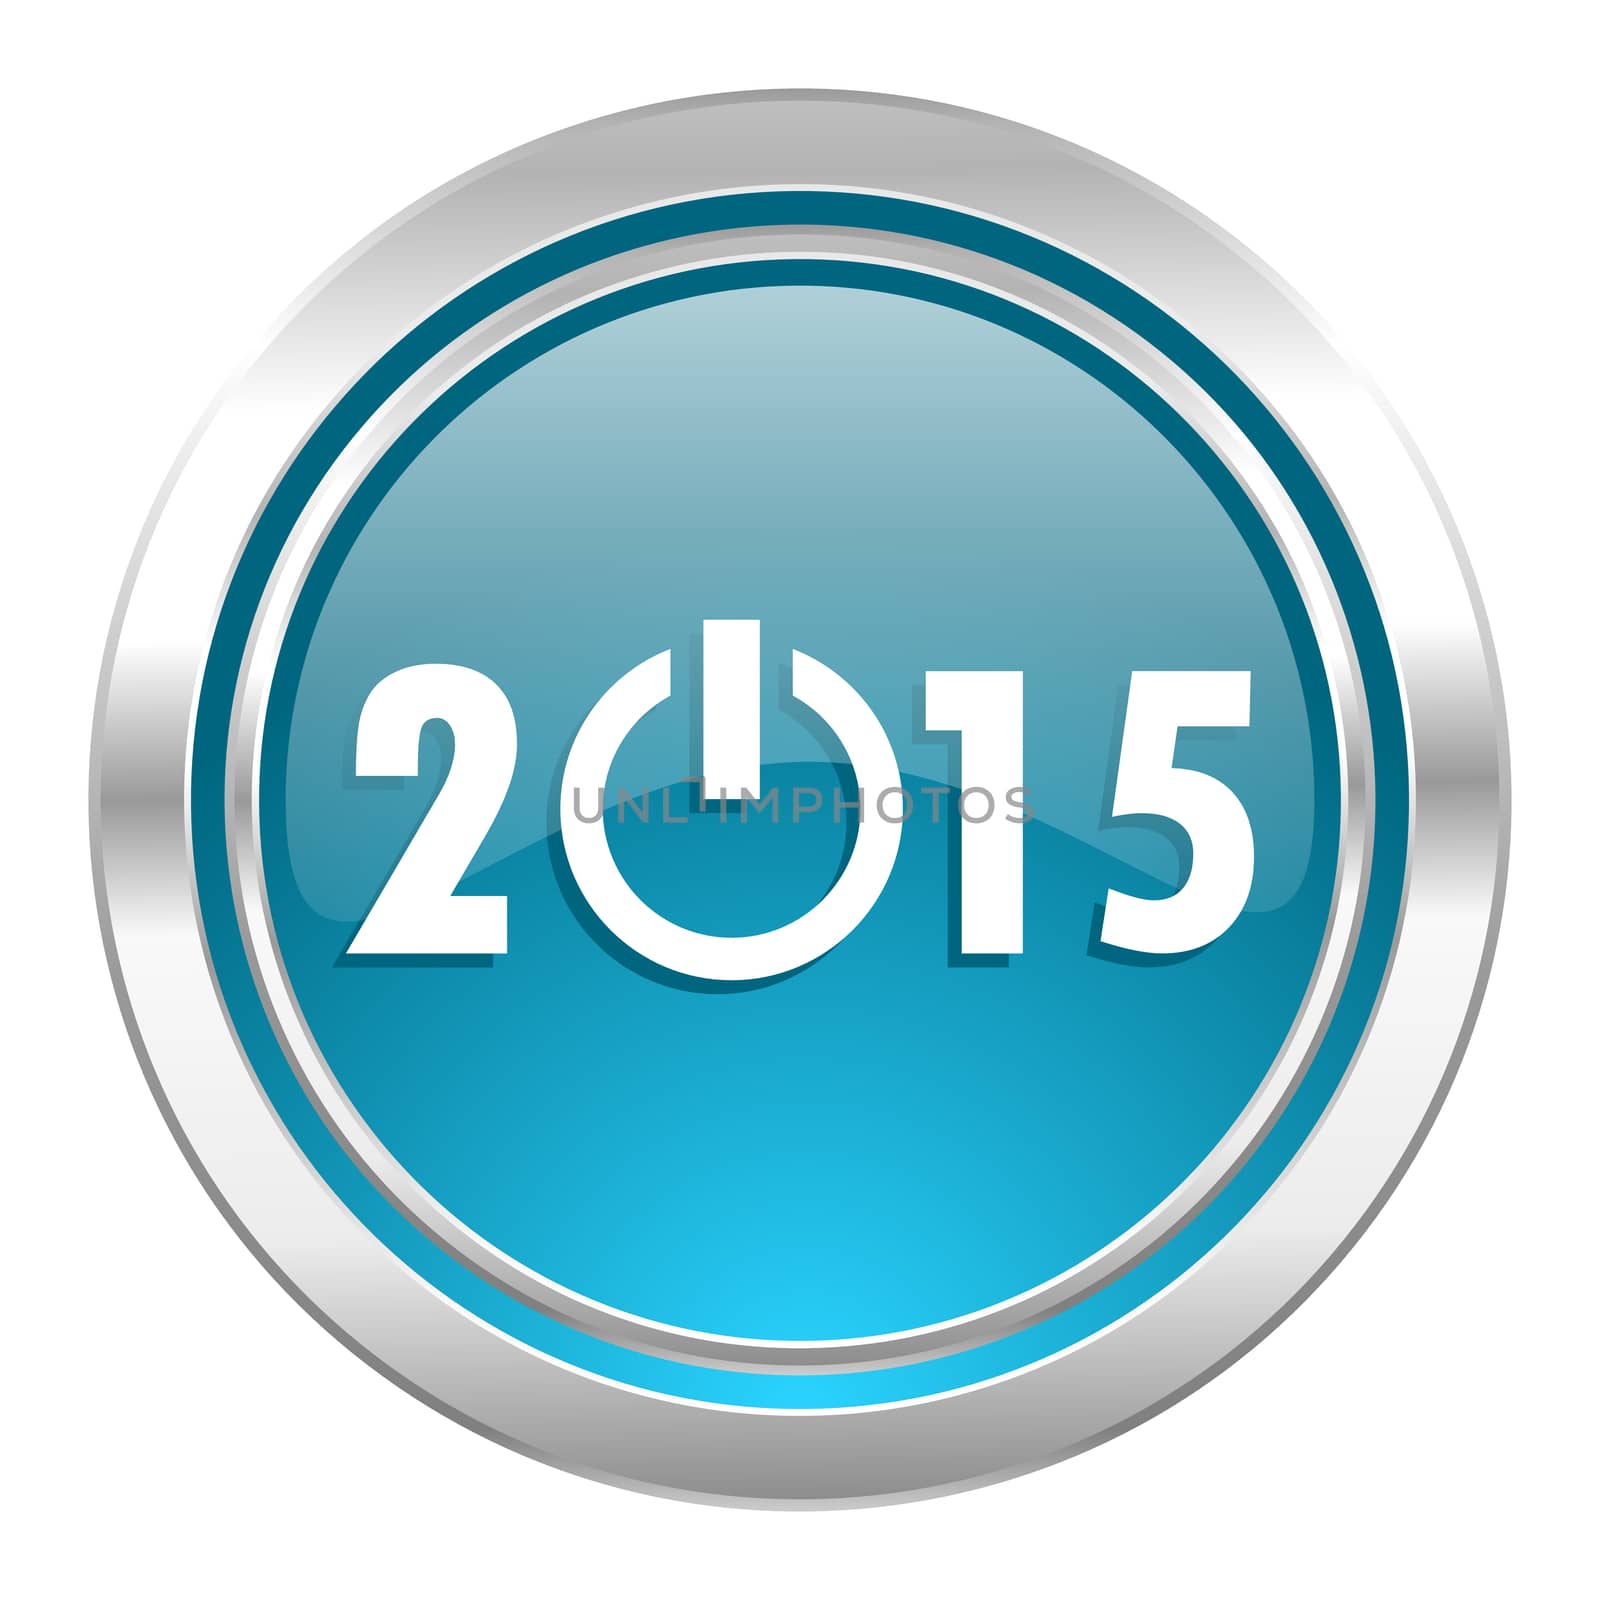 new year 2015 icon